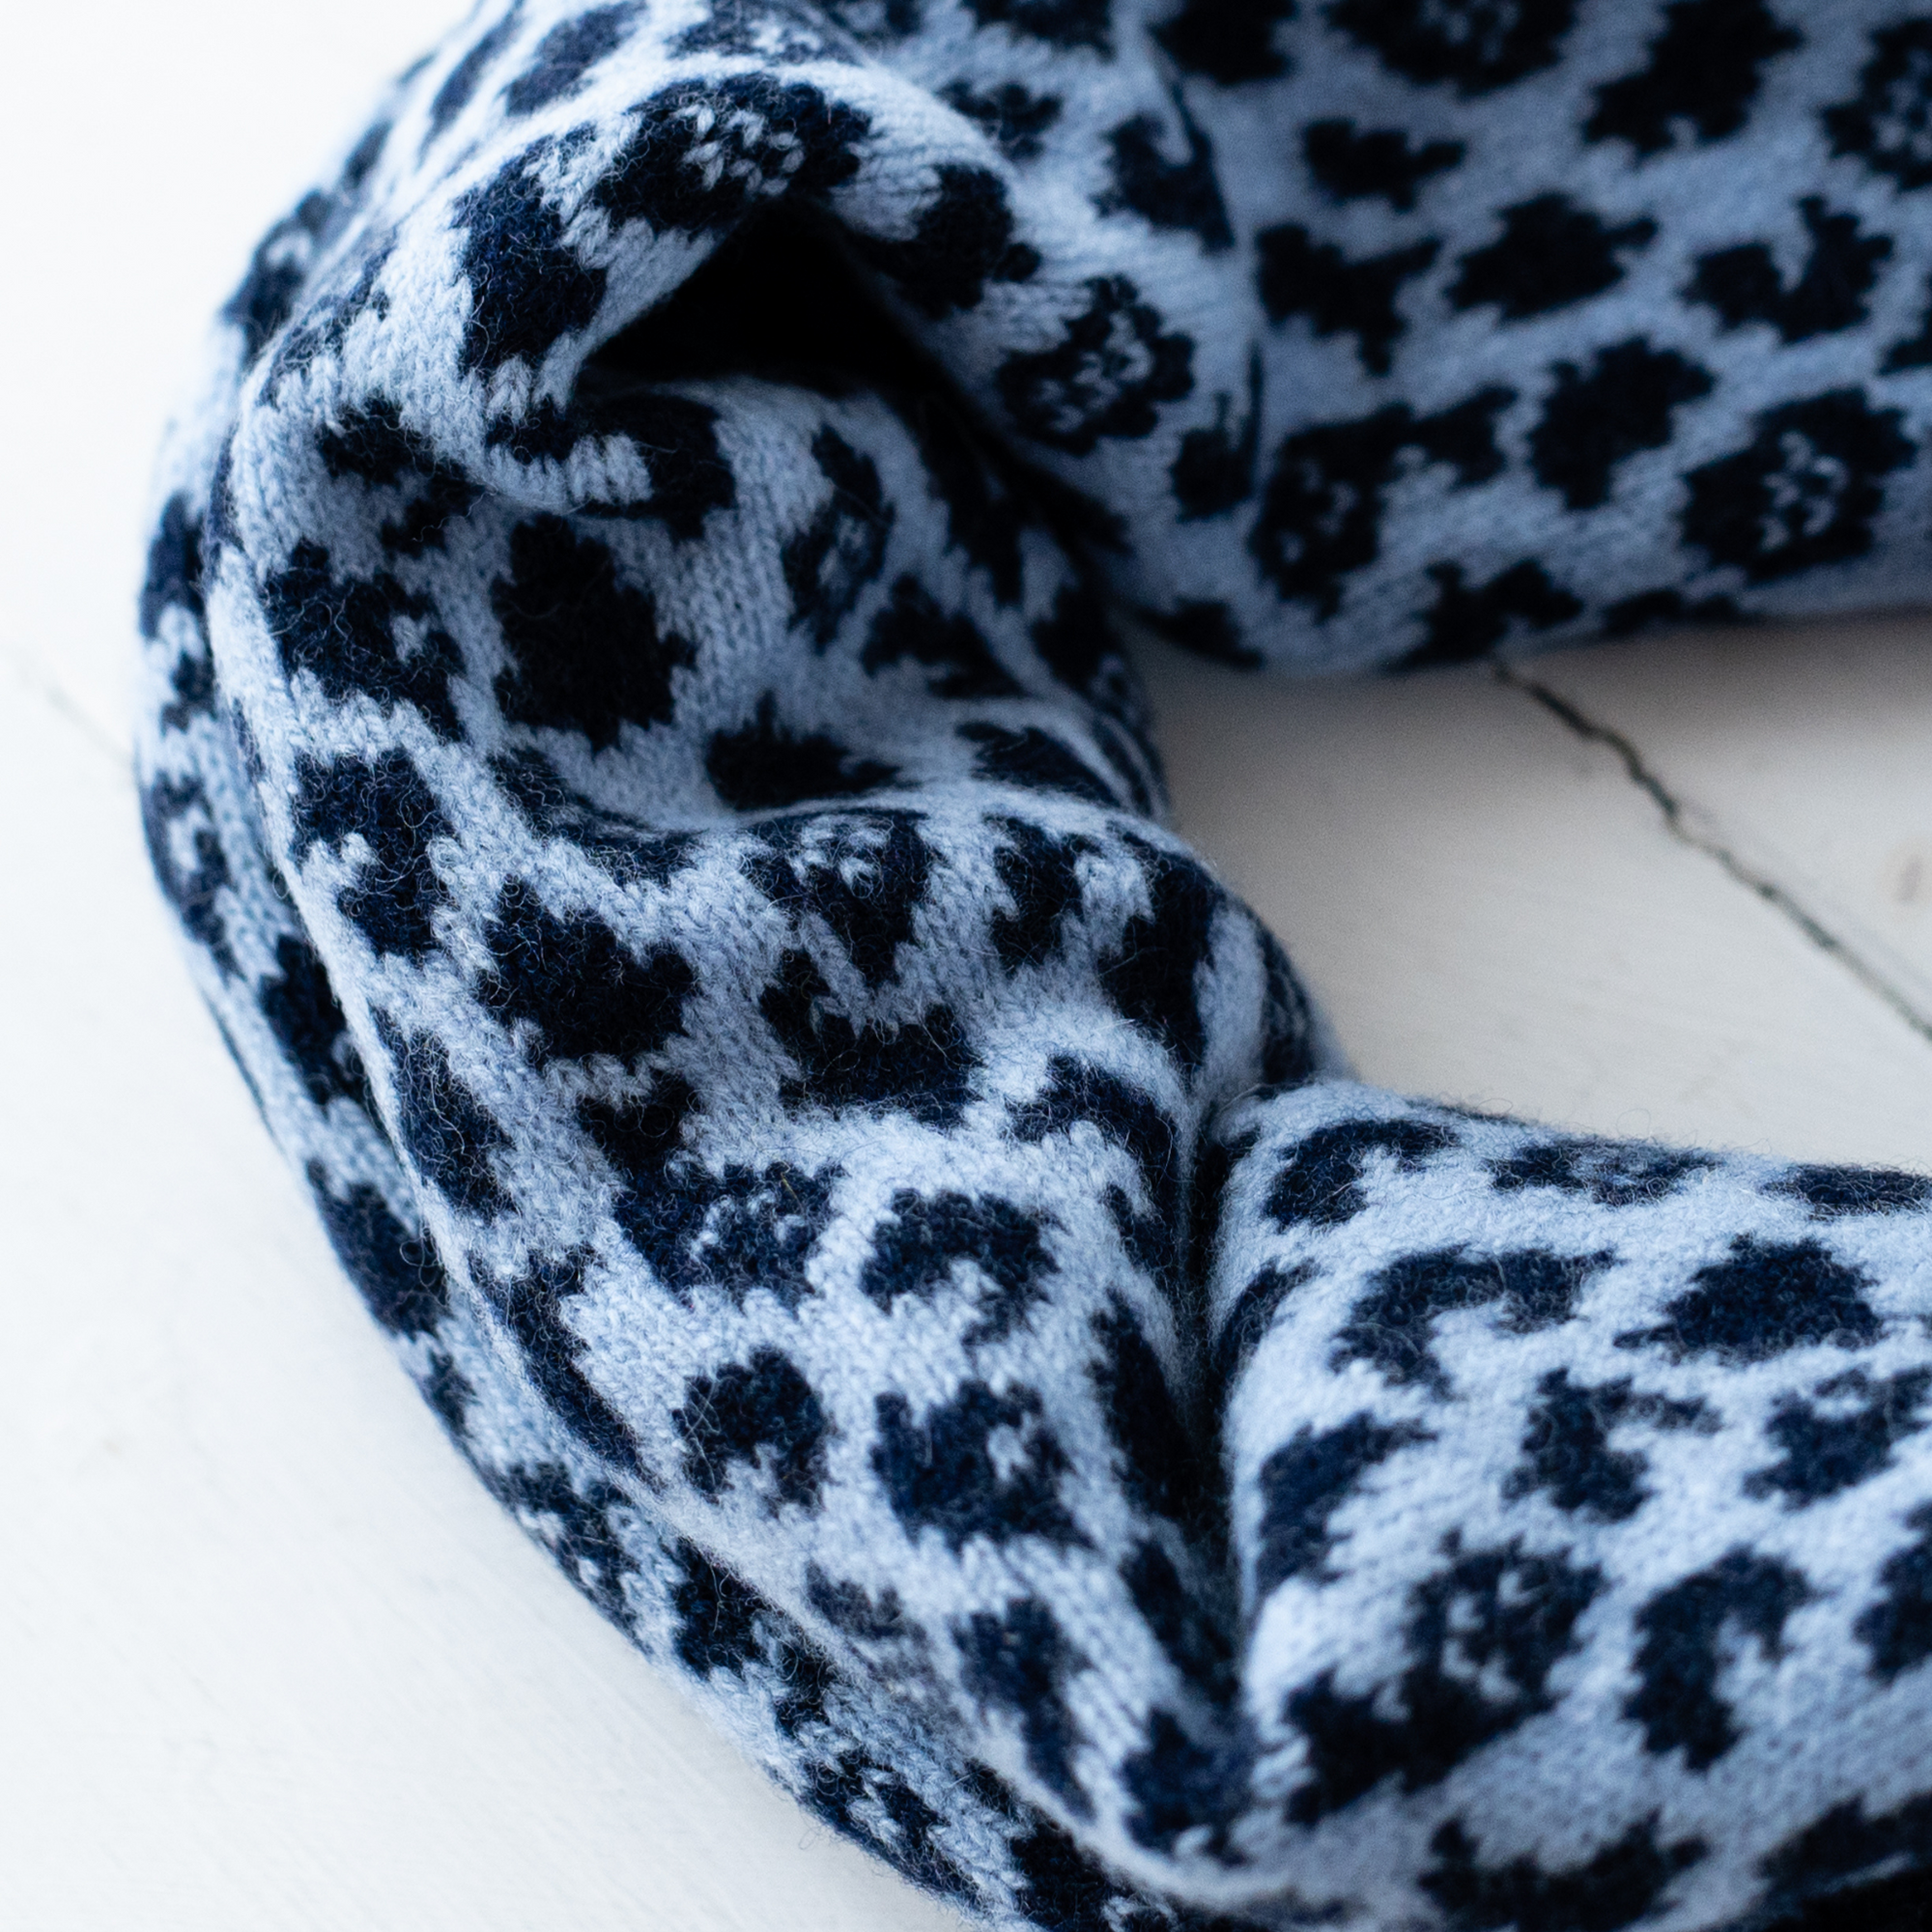 Leopard cowl - light blue and navy (MADE TO ORDER)